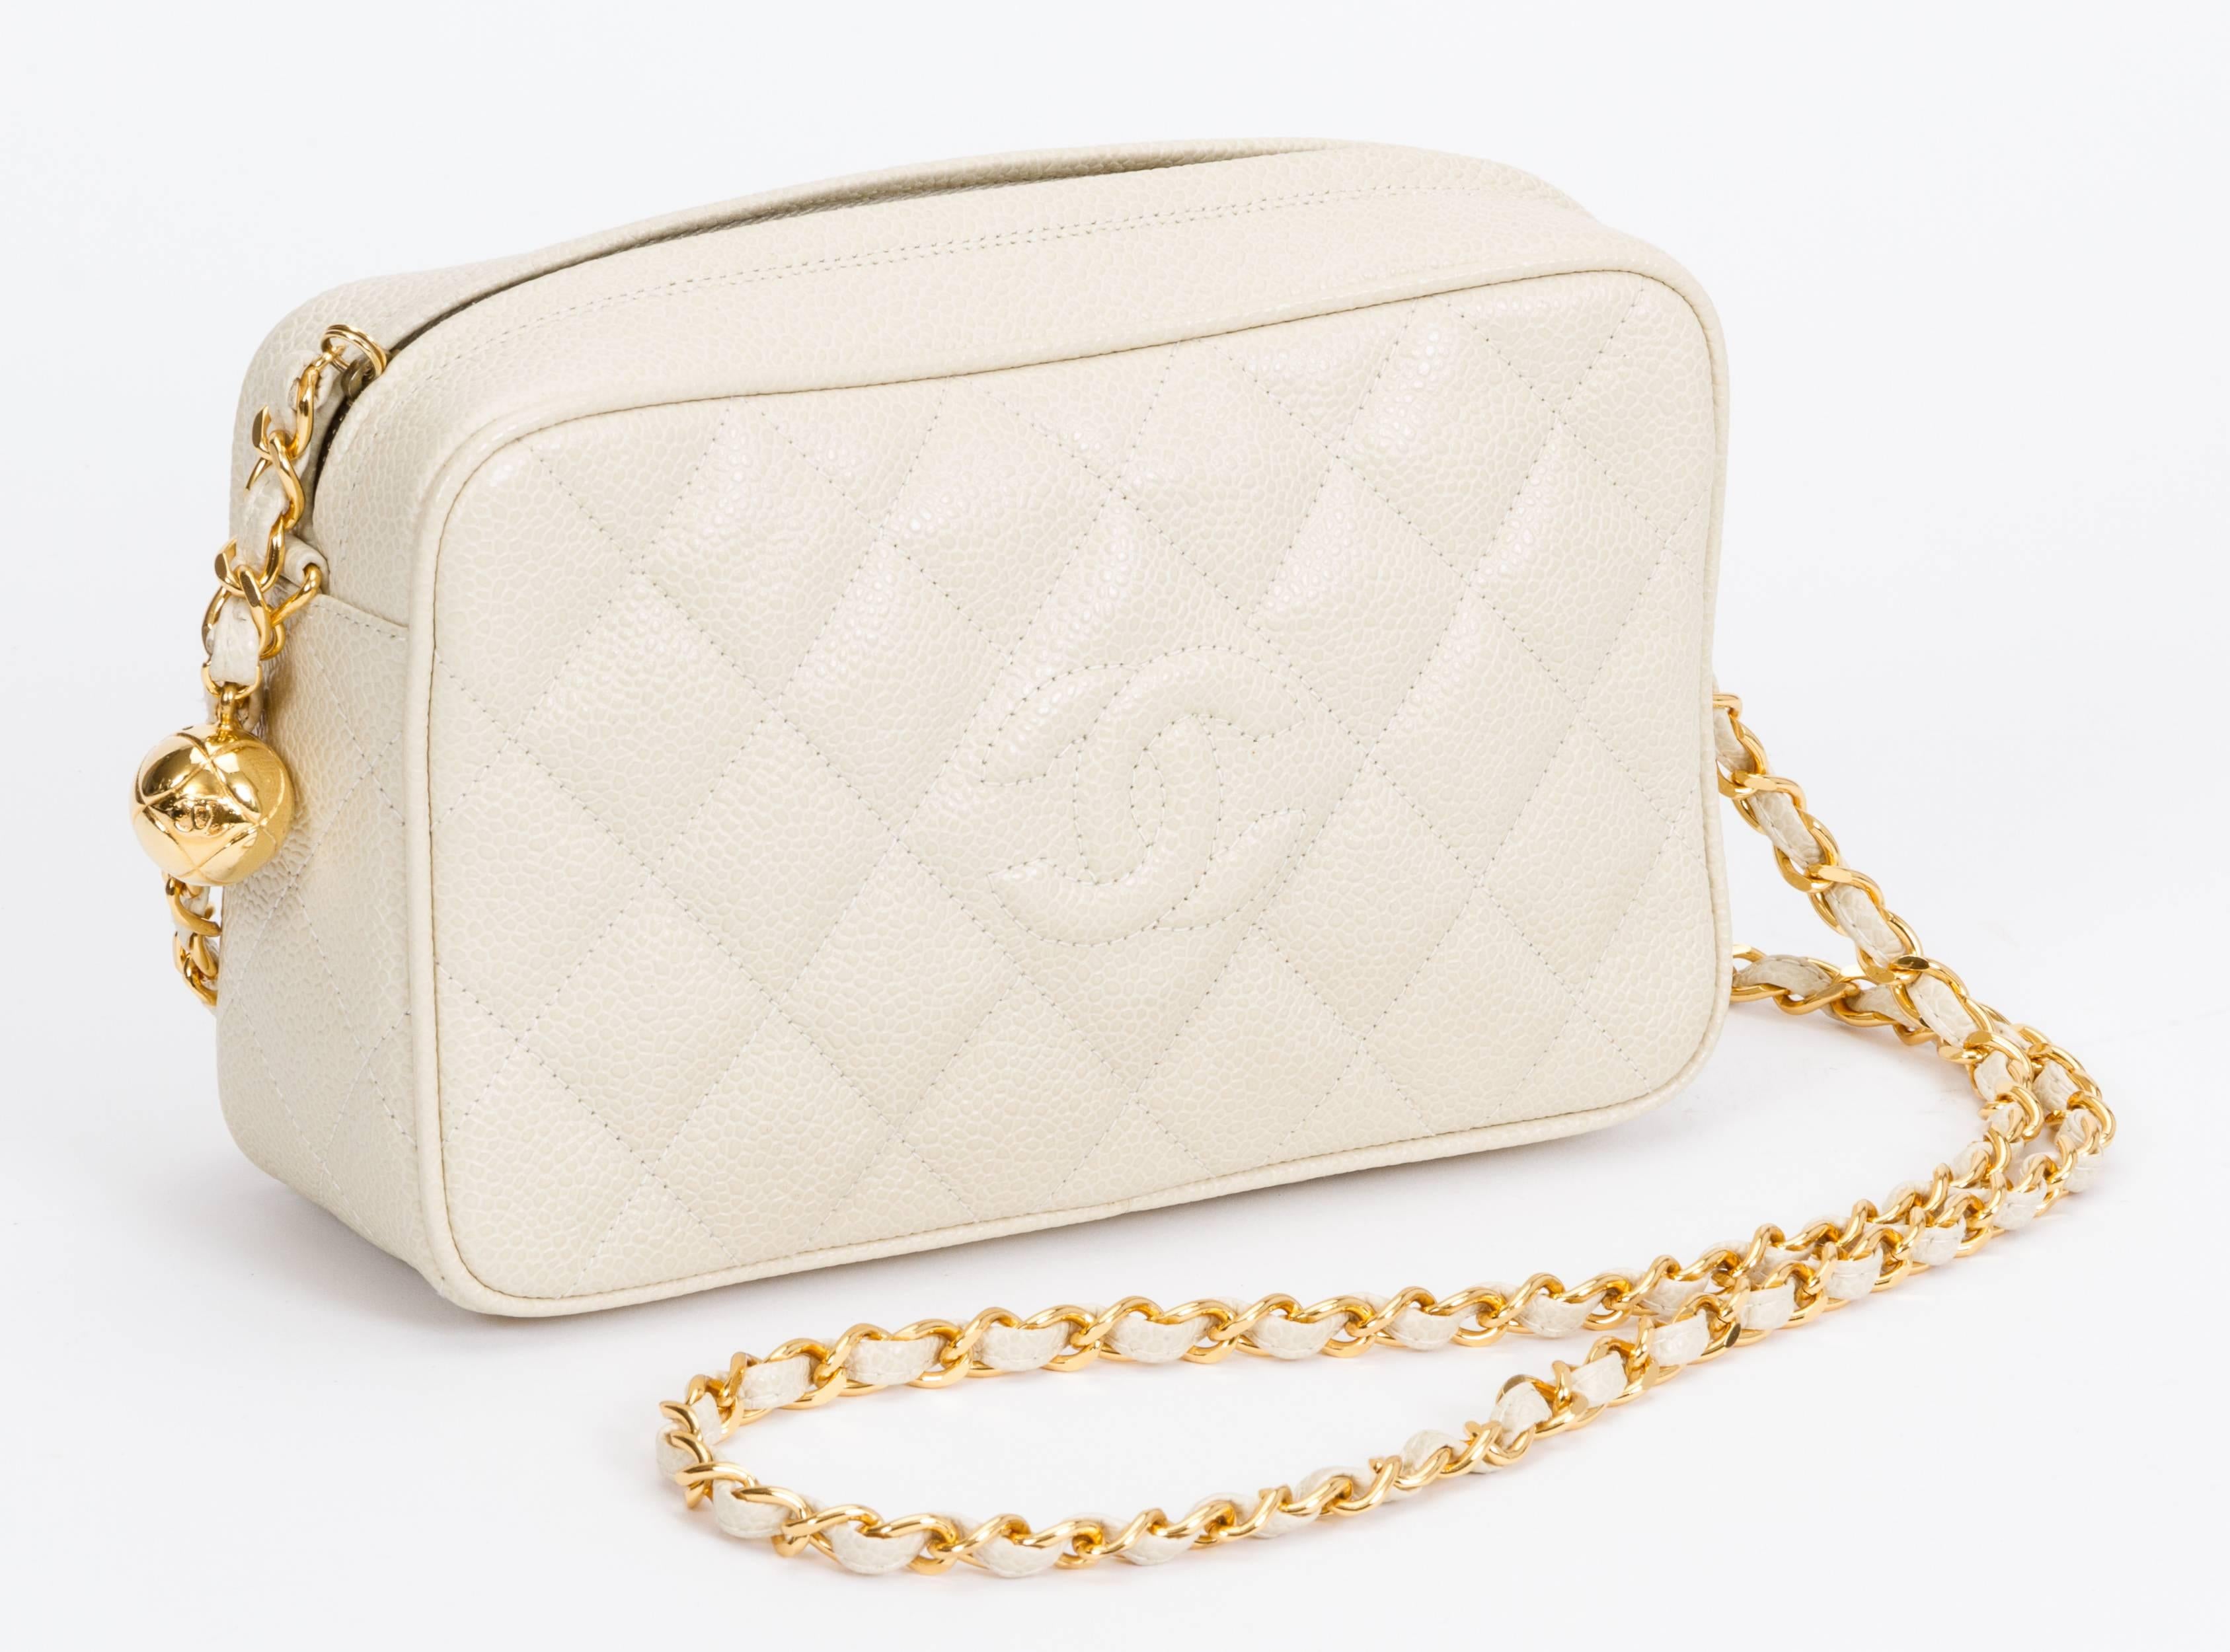 Chanel beige caviar quilted camera bag with gold tone hardware. Cross body, shoulder drop 20